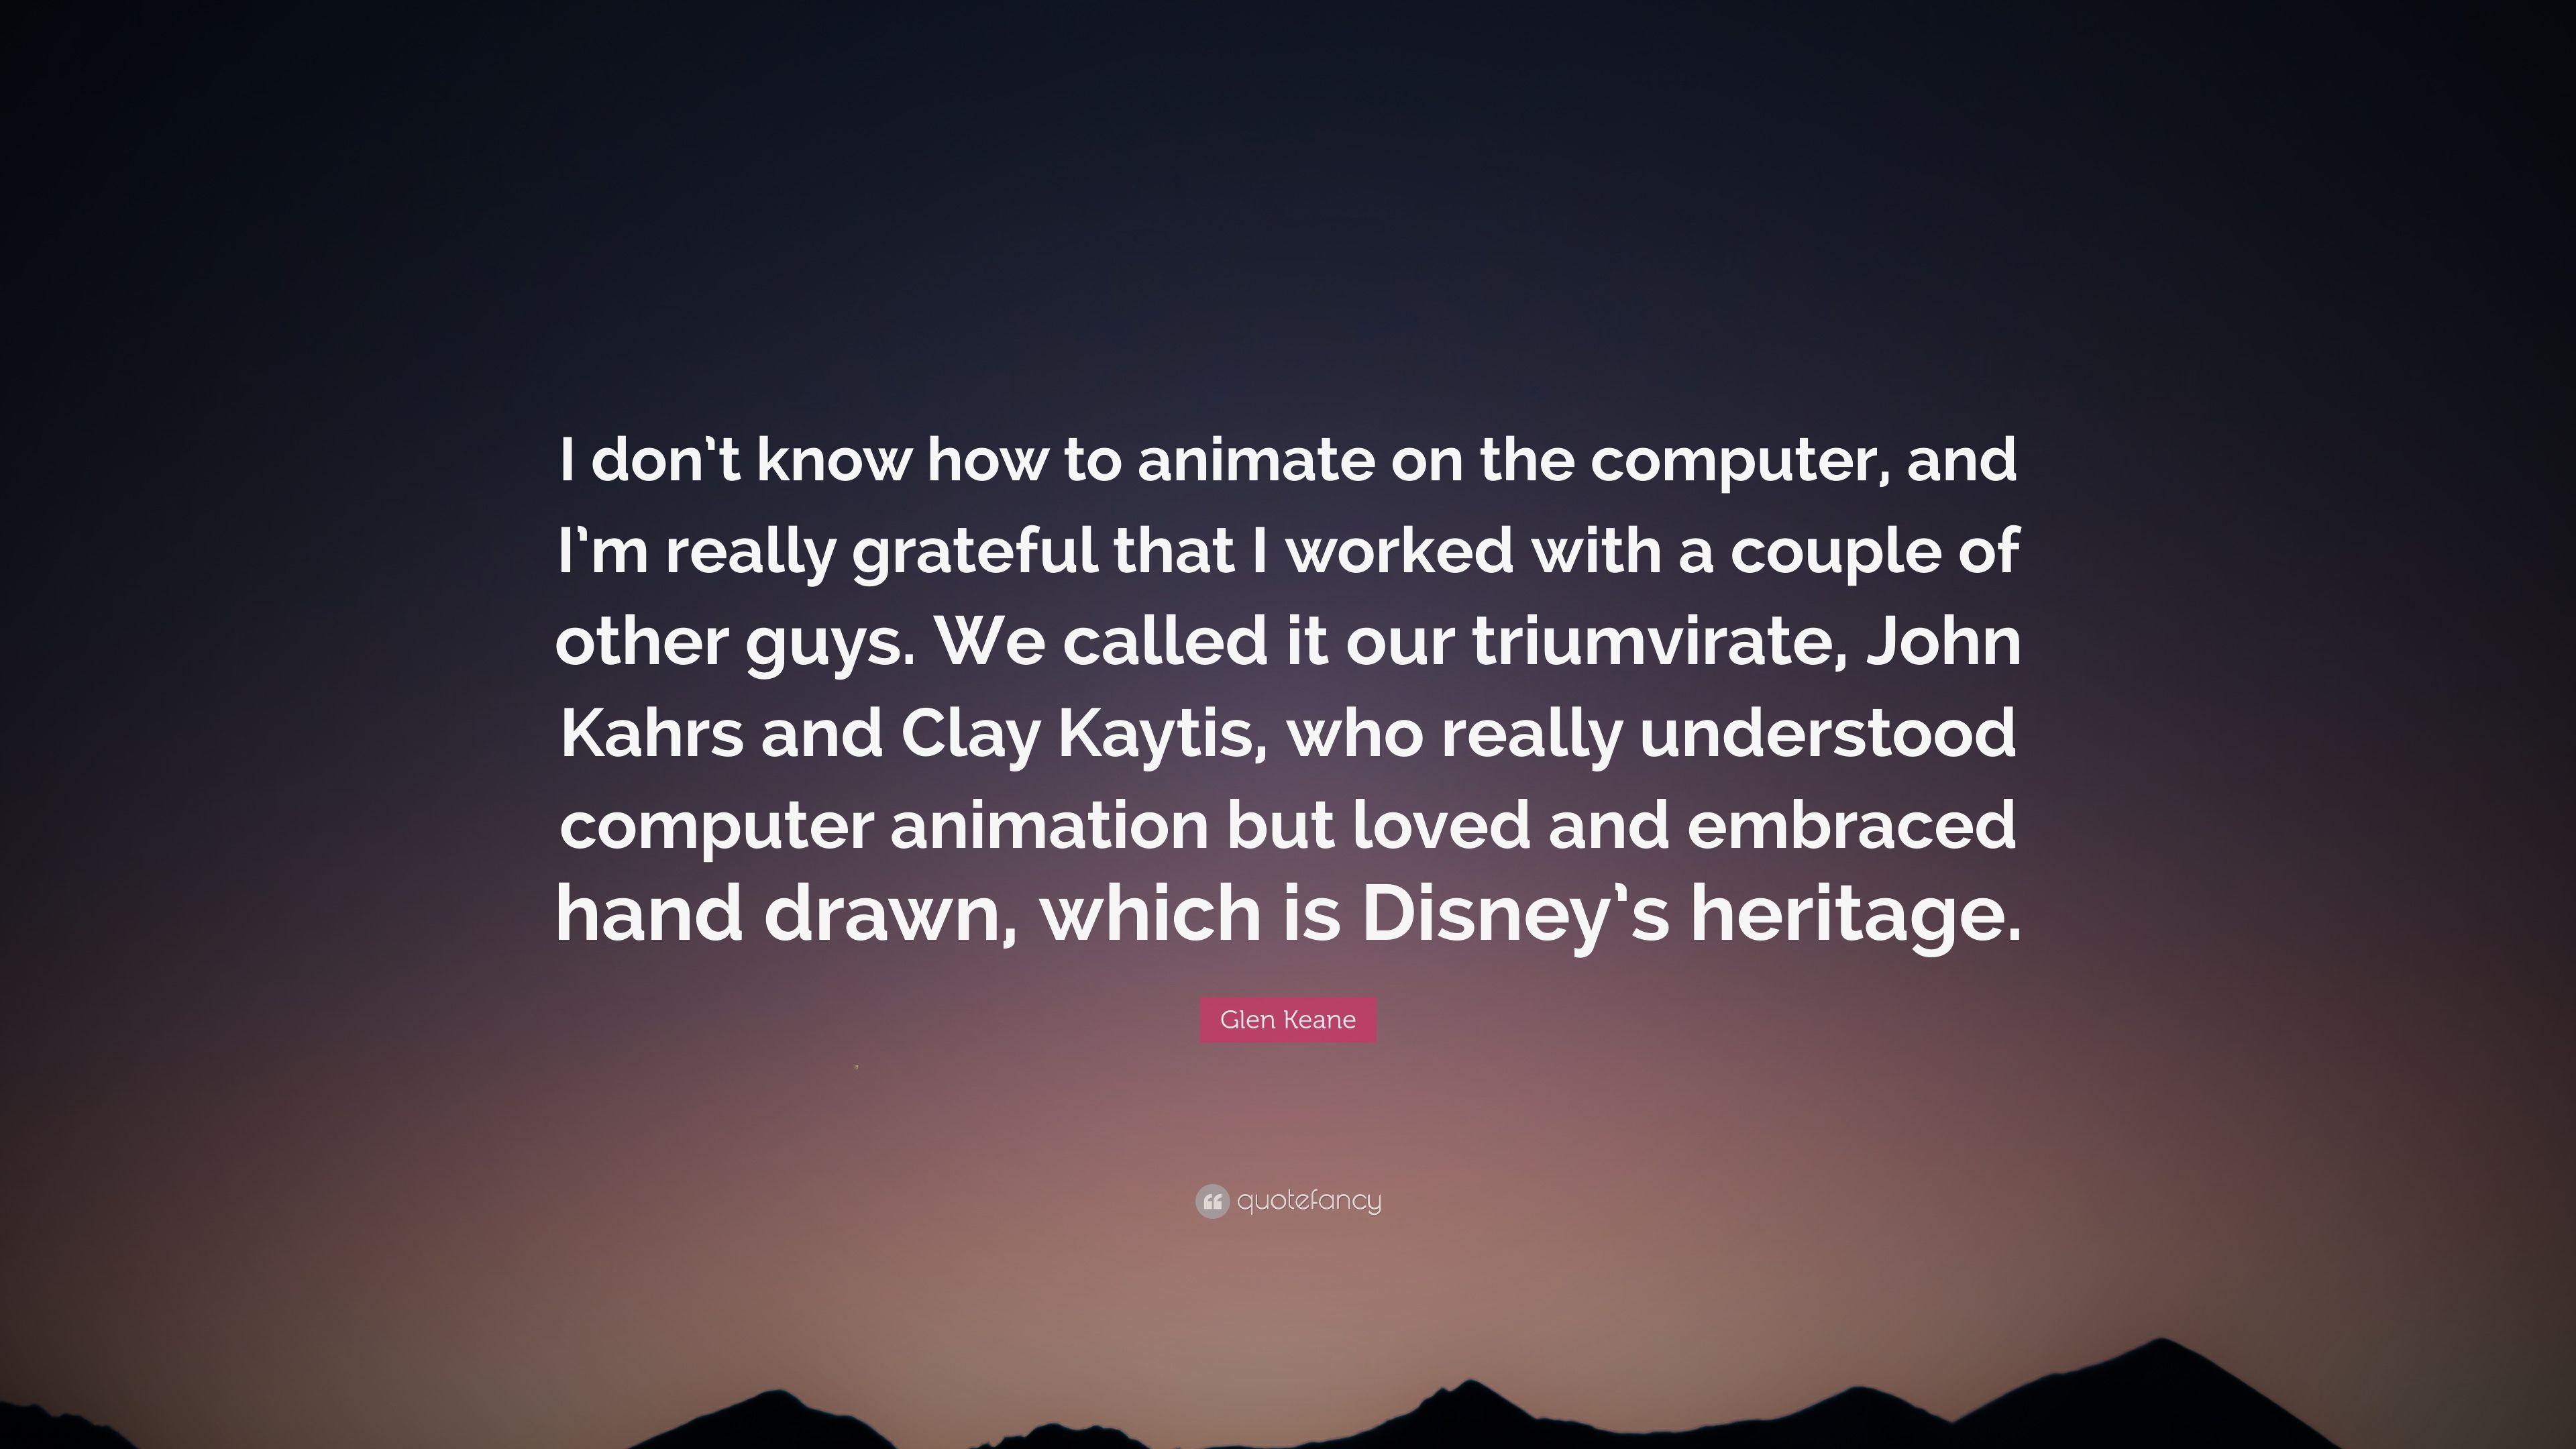 Glen Keane Quote: “I don't know how to animate on